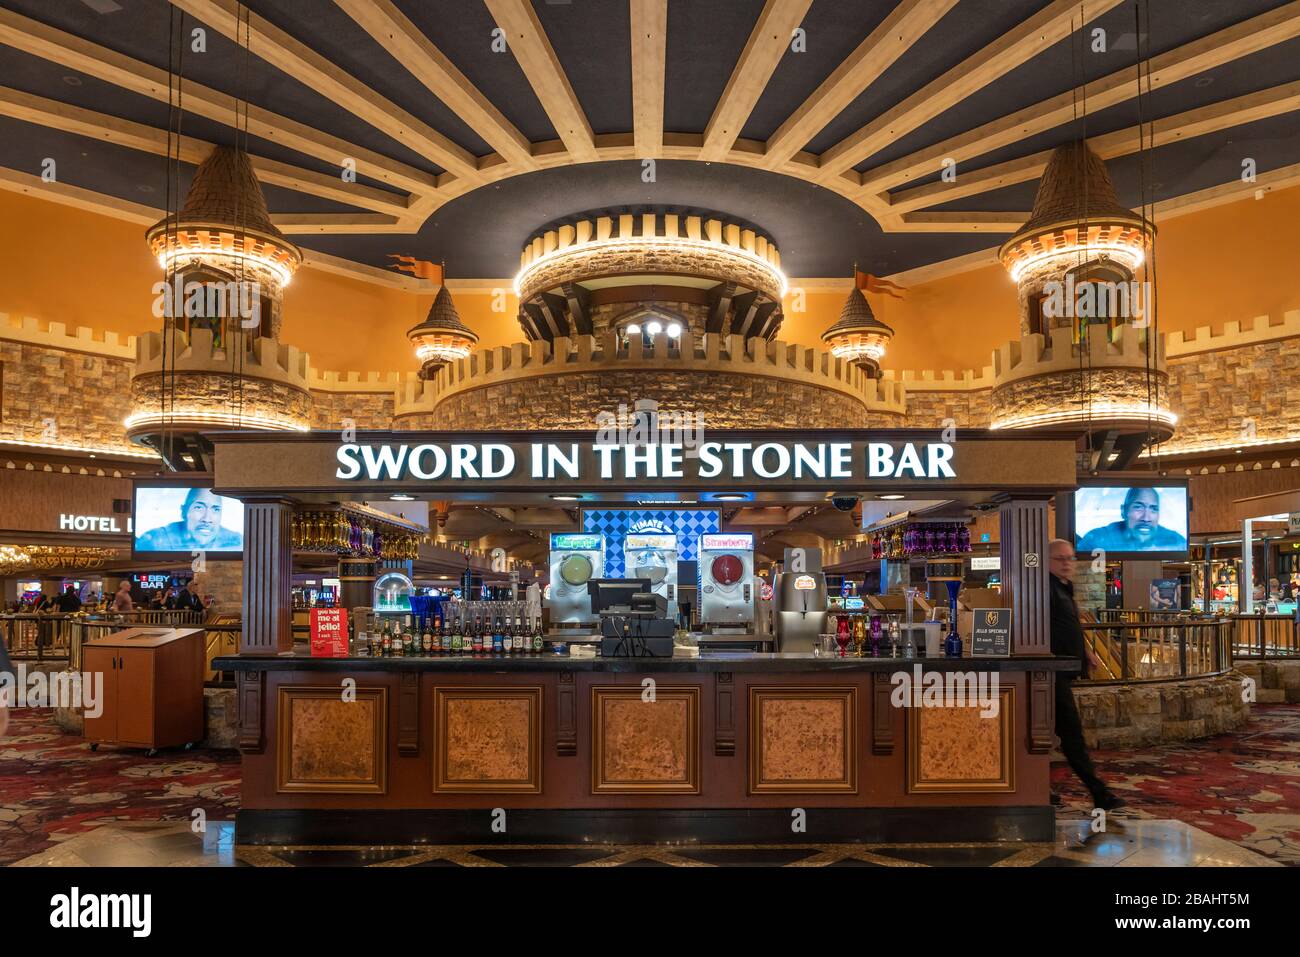 The Sword in the Stone Bar inside the Excalibur Hotel and Casino along The Strip in Las Vegas, Nevada, USA. Stock Photo